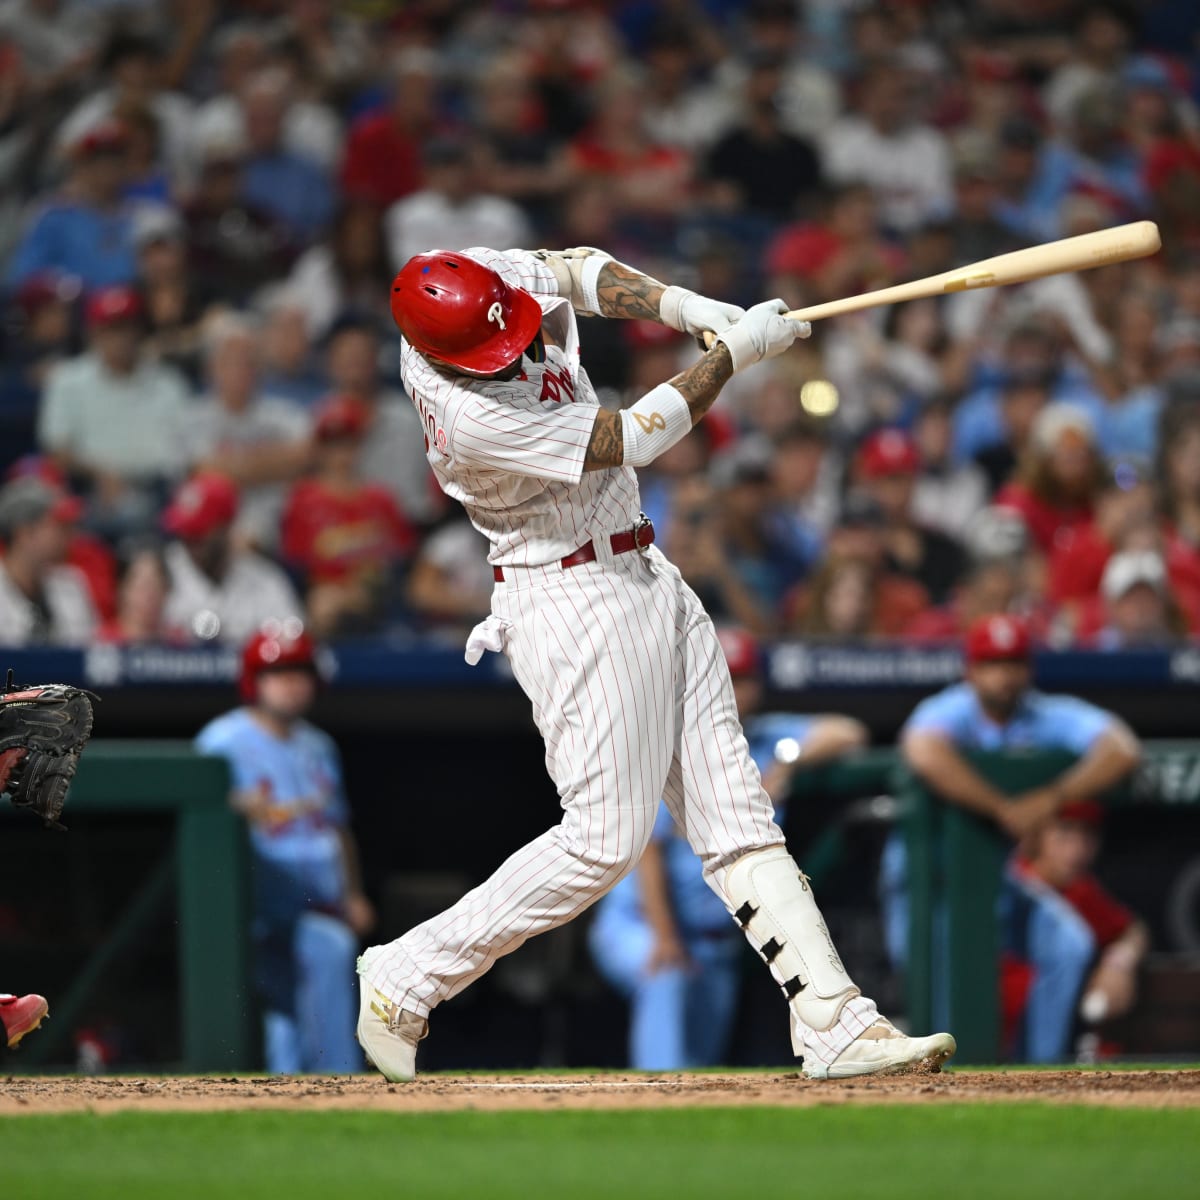 Phillies homers month: Franchise record, 3rd best in baseball history